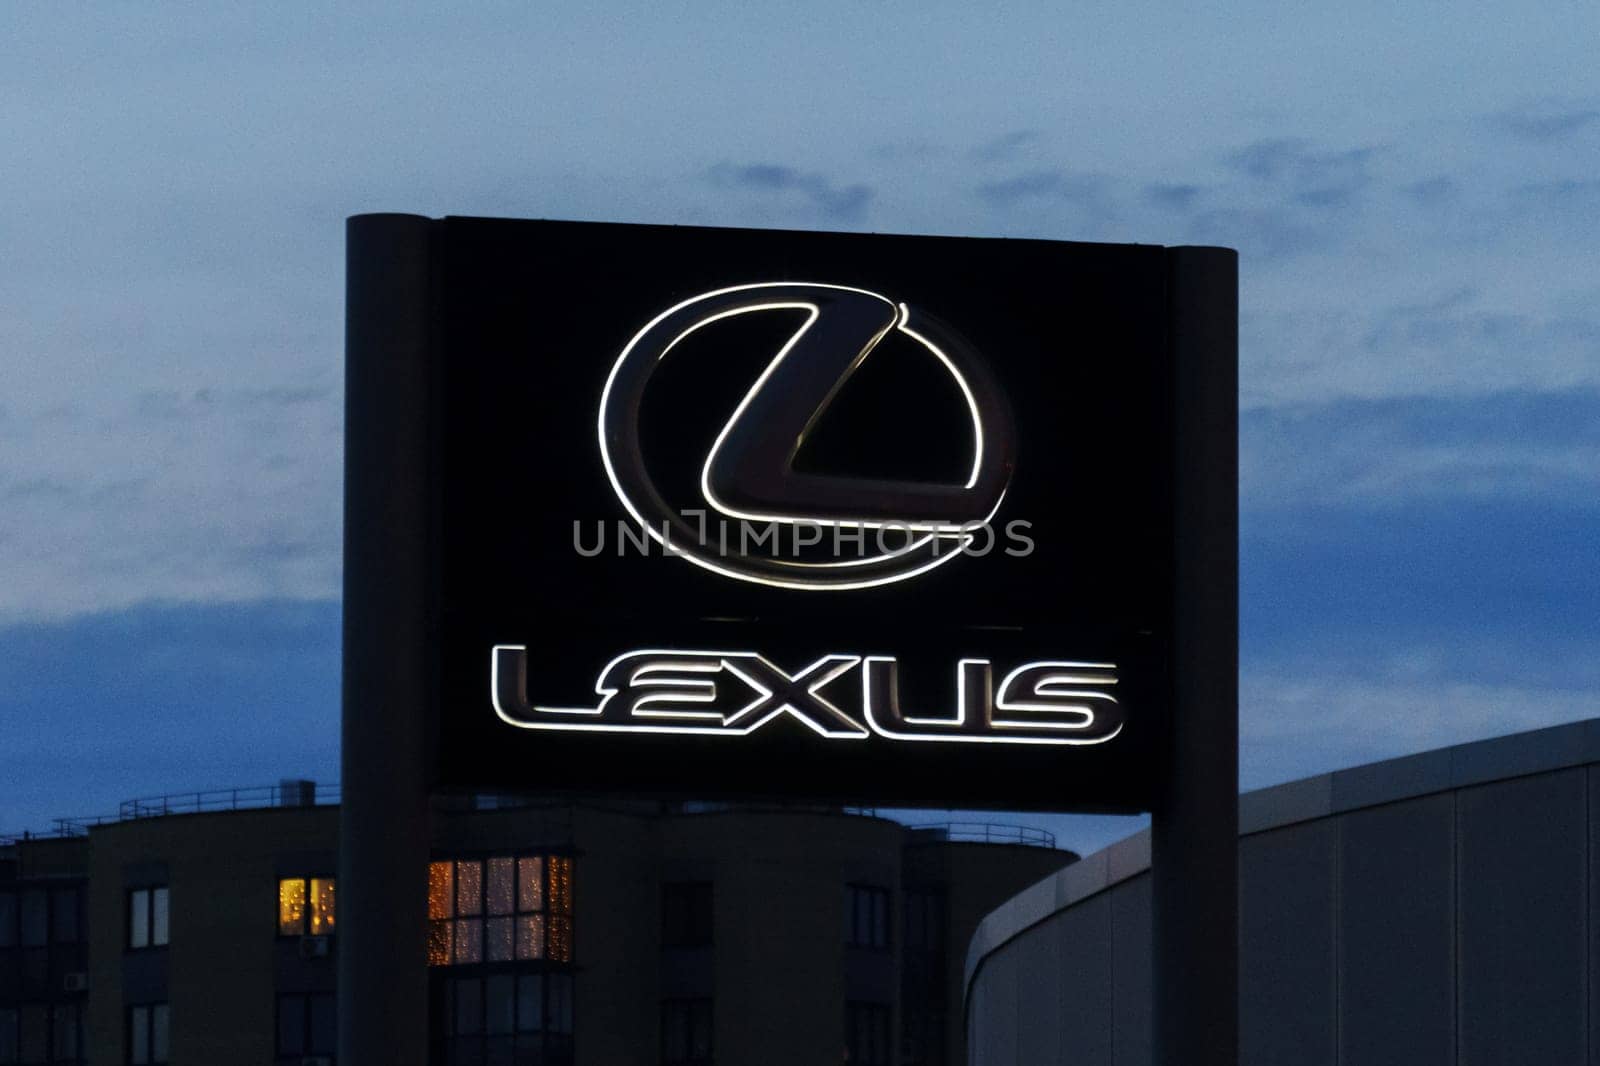 Tyumen, Russia-March 18, 2024: Sign displaying the Lexus logo on the side of a building, indicating a dealership or service center for the luxury car brand. by darksoul72